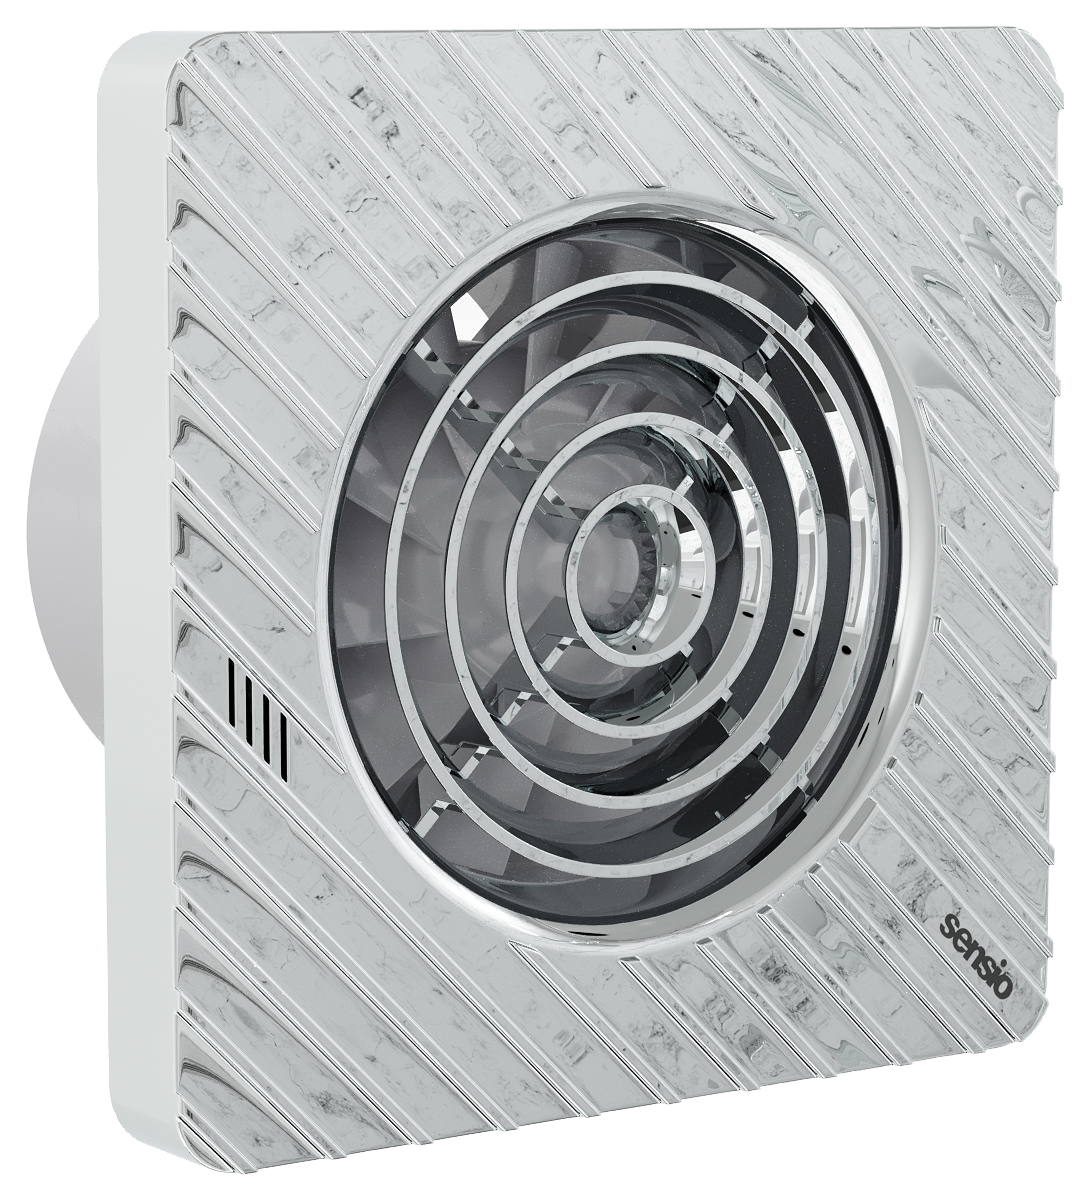 Image of Sensio Drax Chrome Wall Ventilation Fan with Aquilo Ventilation Ducting Kit - ø100mm